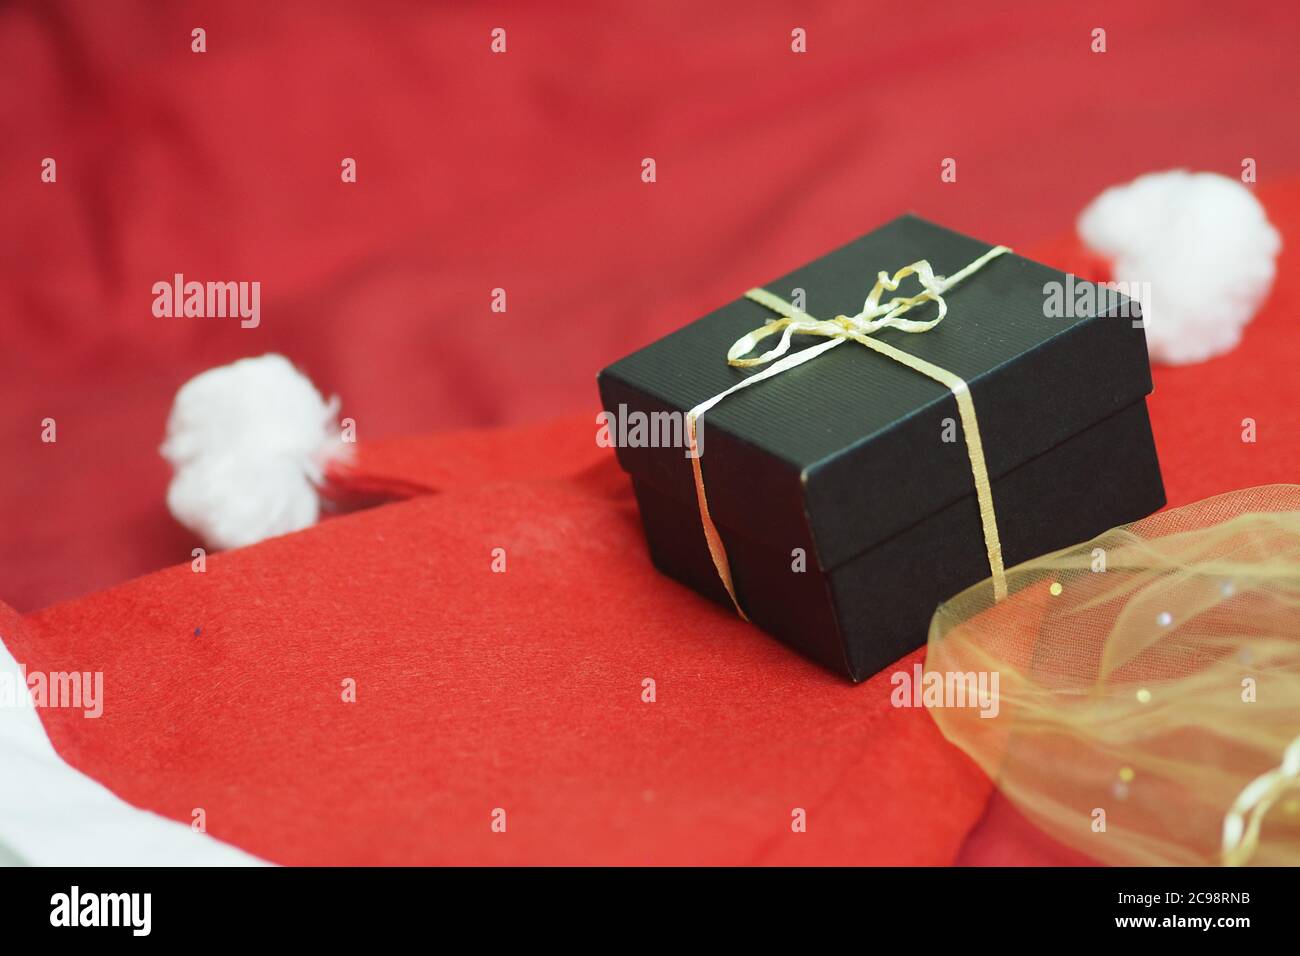 The Girl is opening gifts on Christmas day. Stock Photo